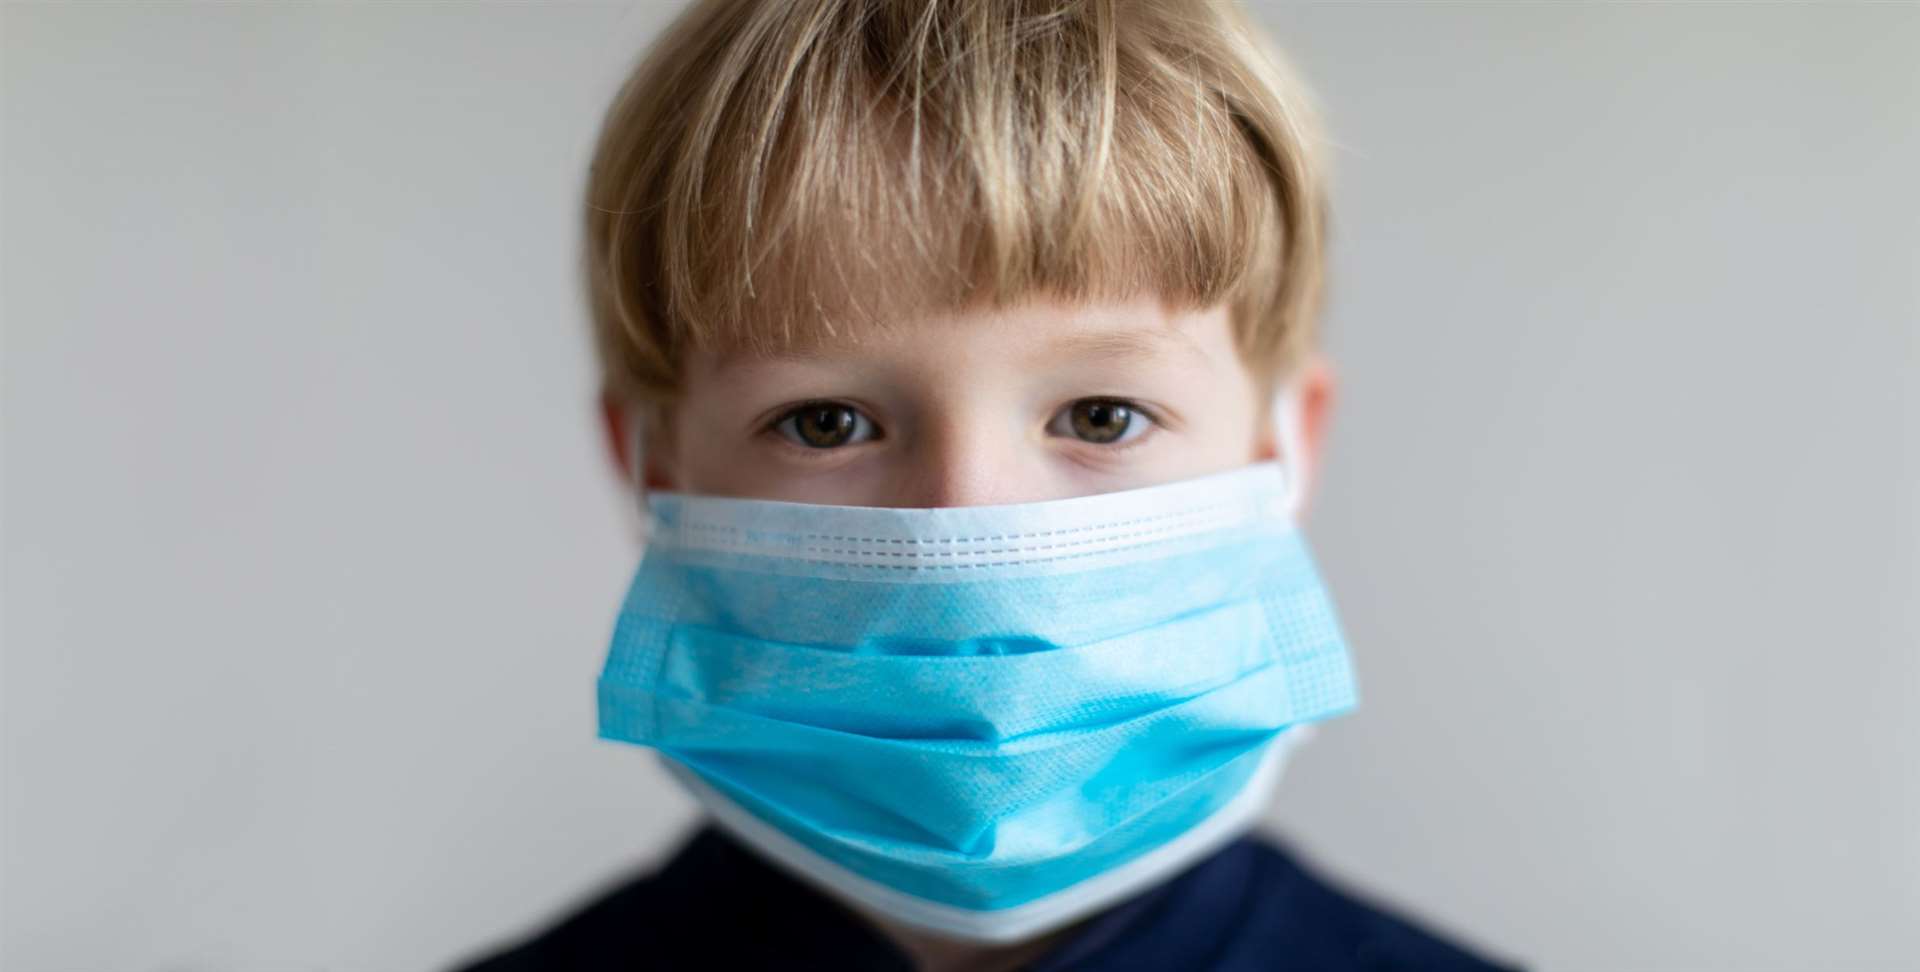 Young boy wearing protective facial mask against covid-19. (42294742)